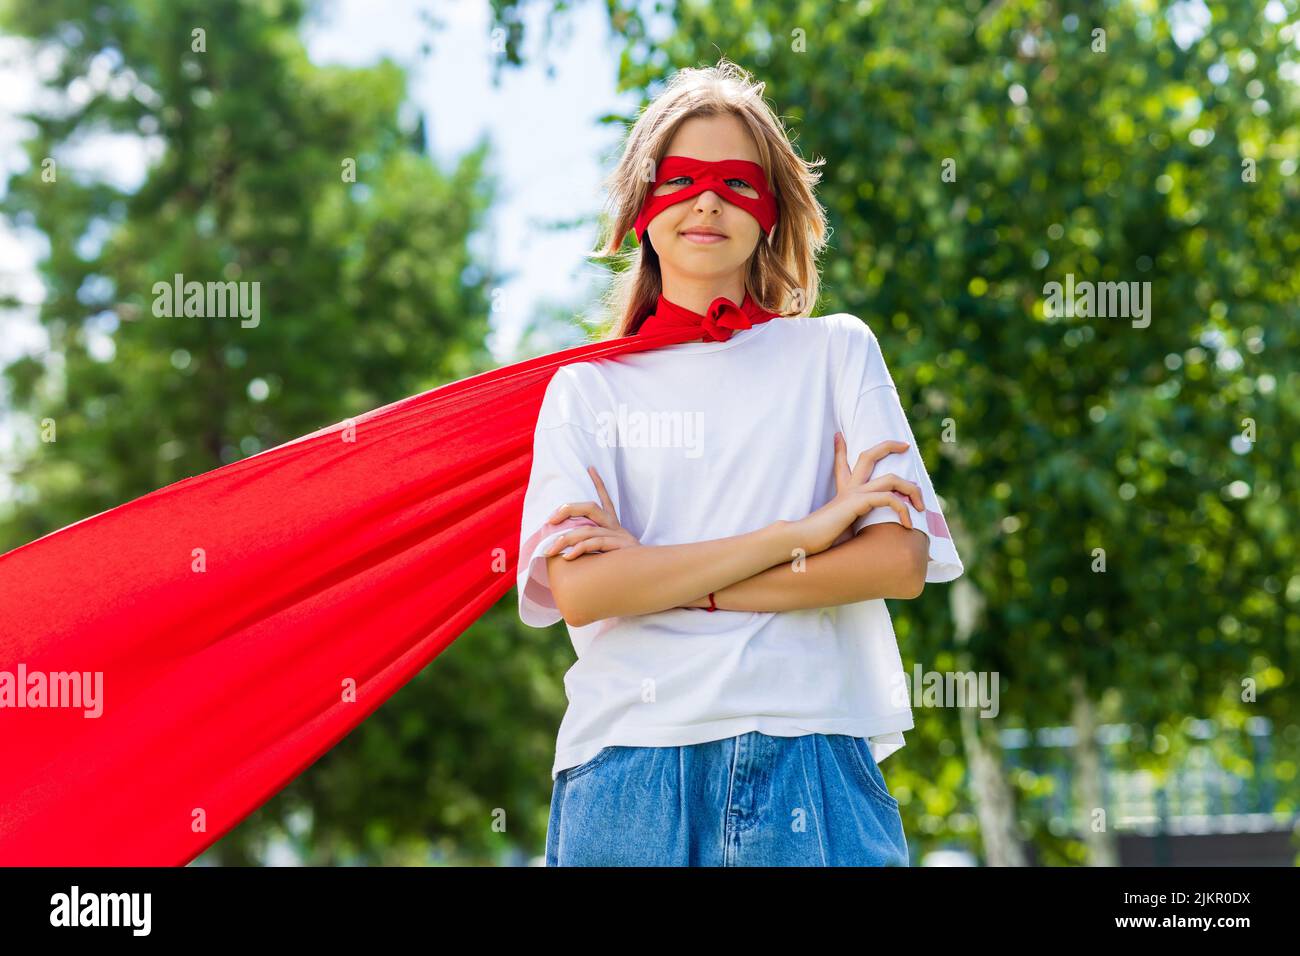 Funny teenager girl playing power super hero over green park background Stock Photo